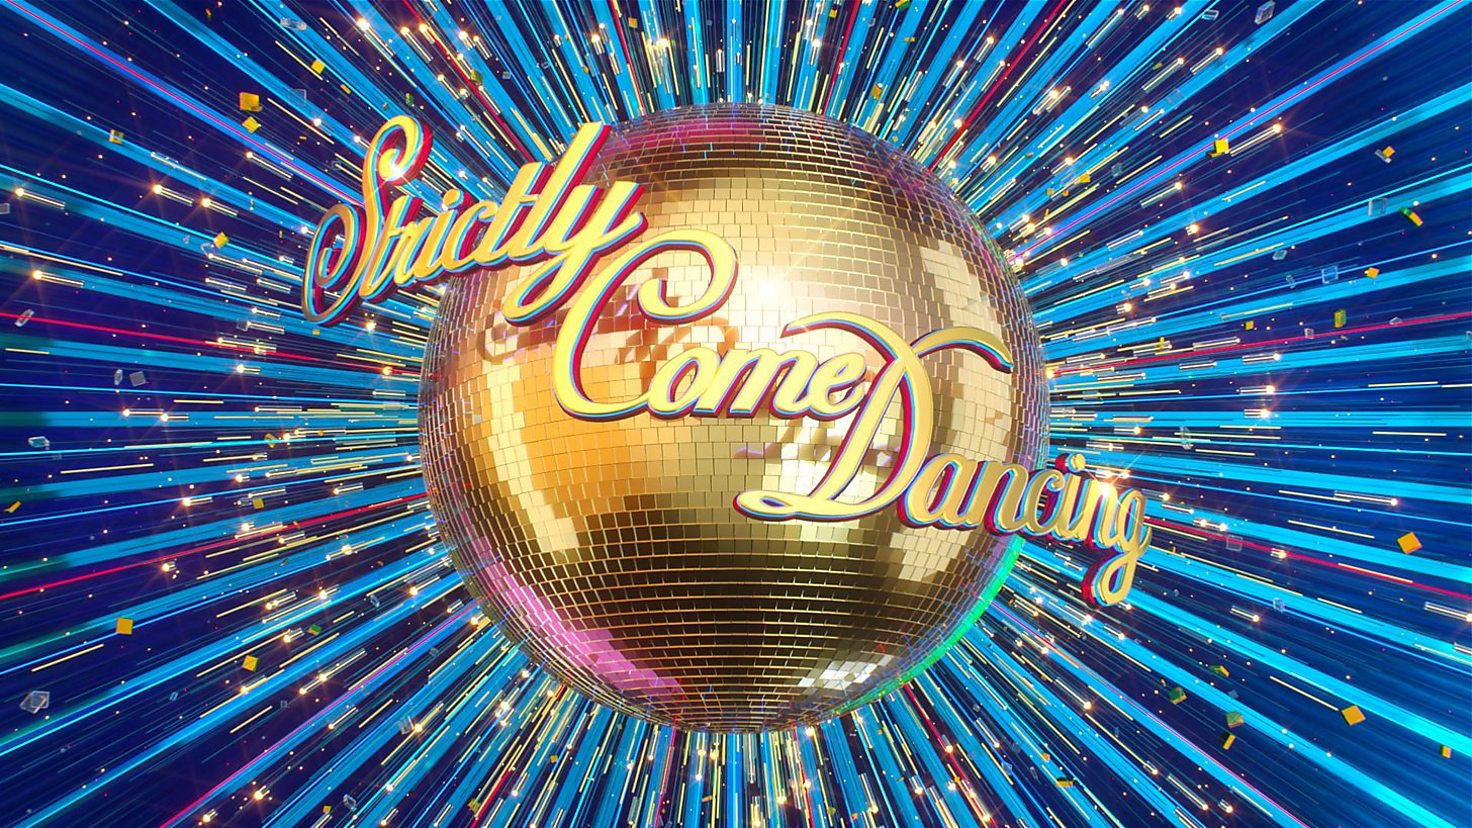 Strictly Come Dancing Celebrates 20 Years Of Dance Magic On The BBC With Brand New Anniversary Show